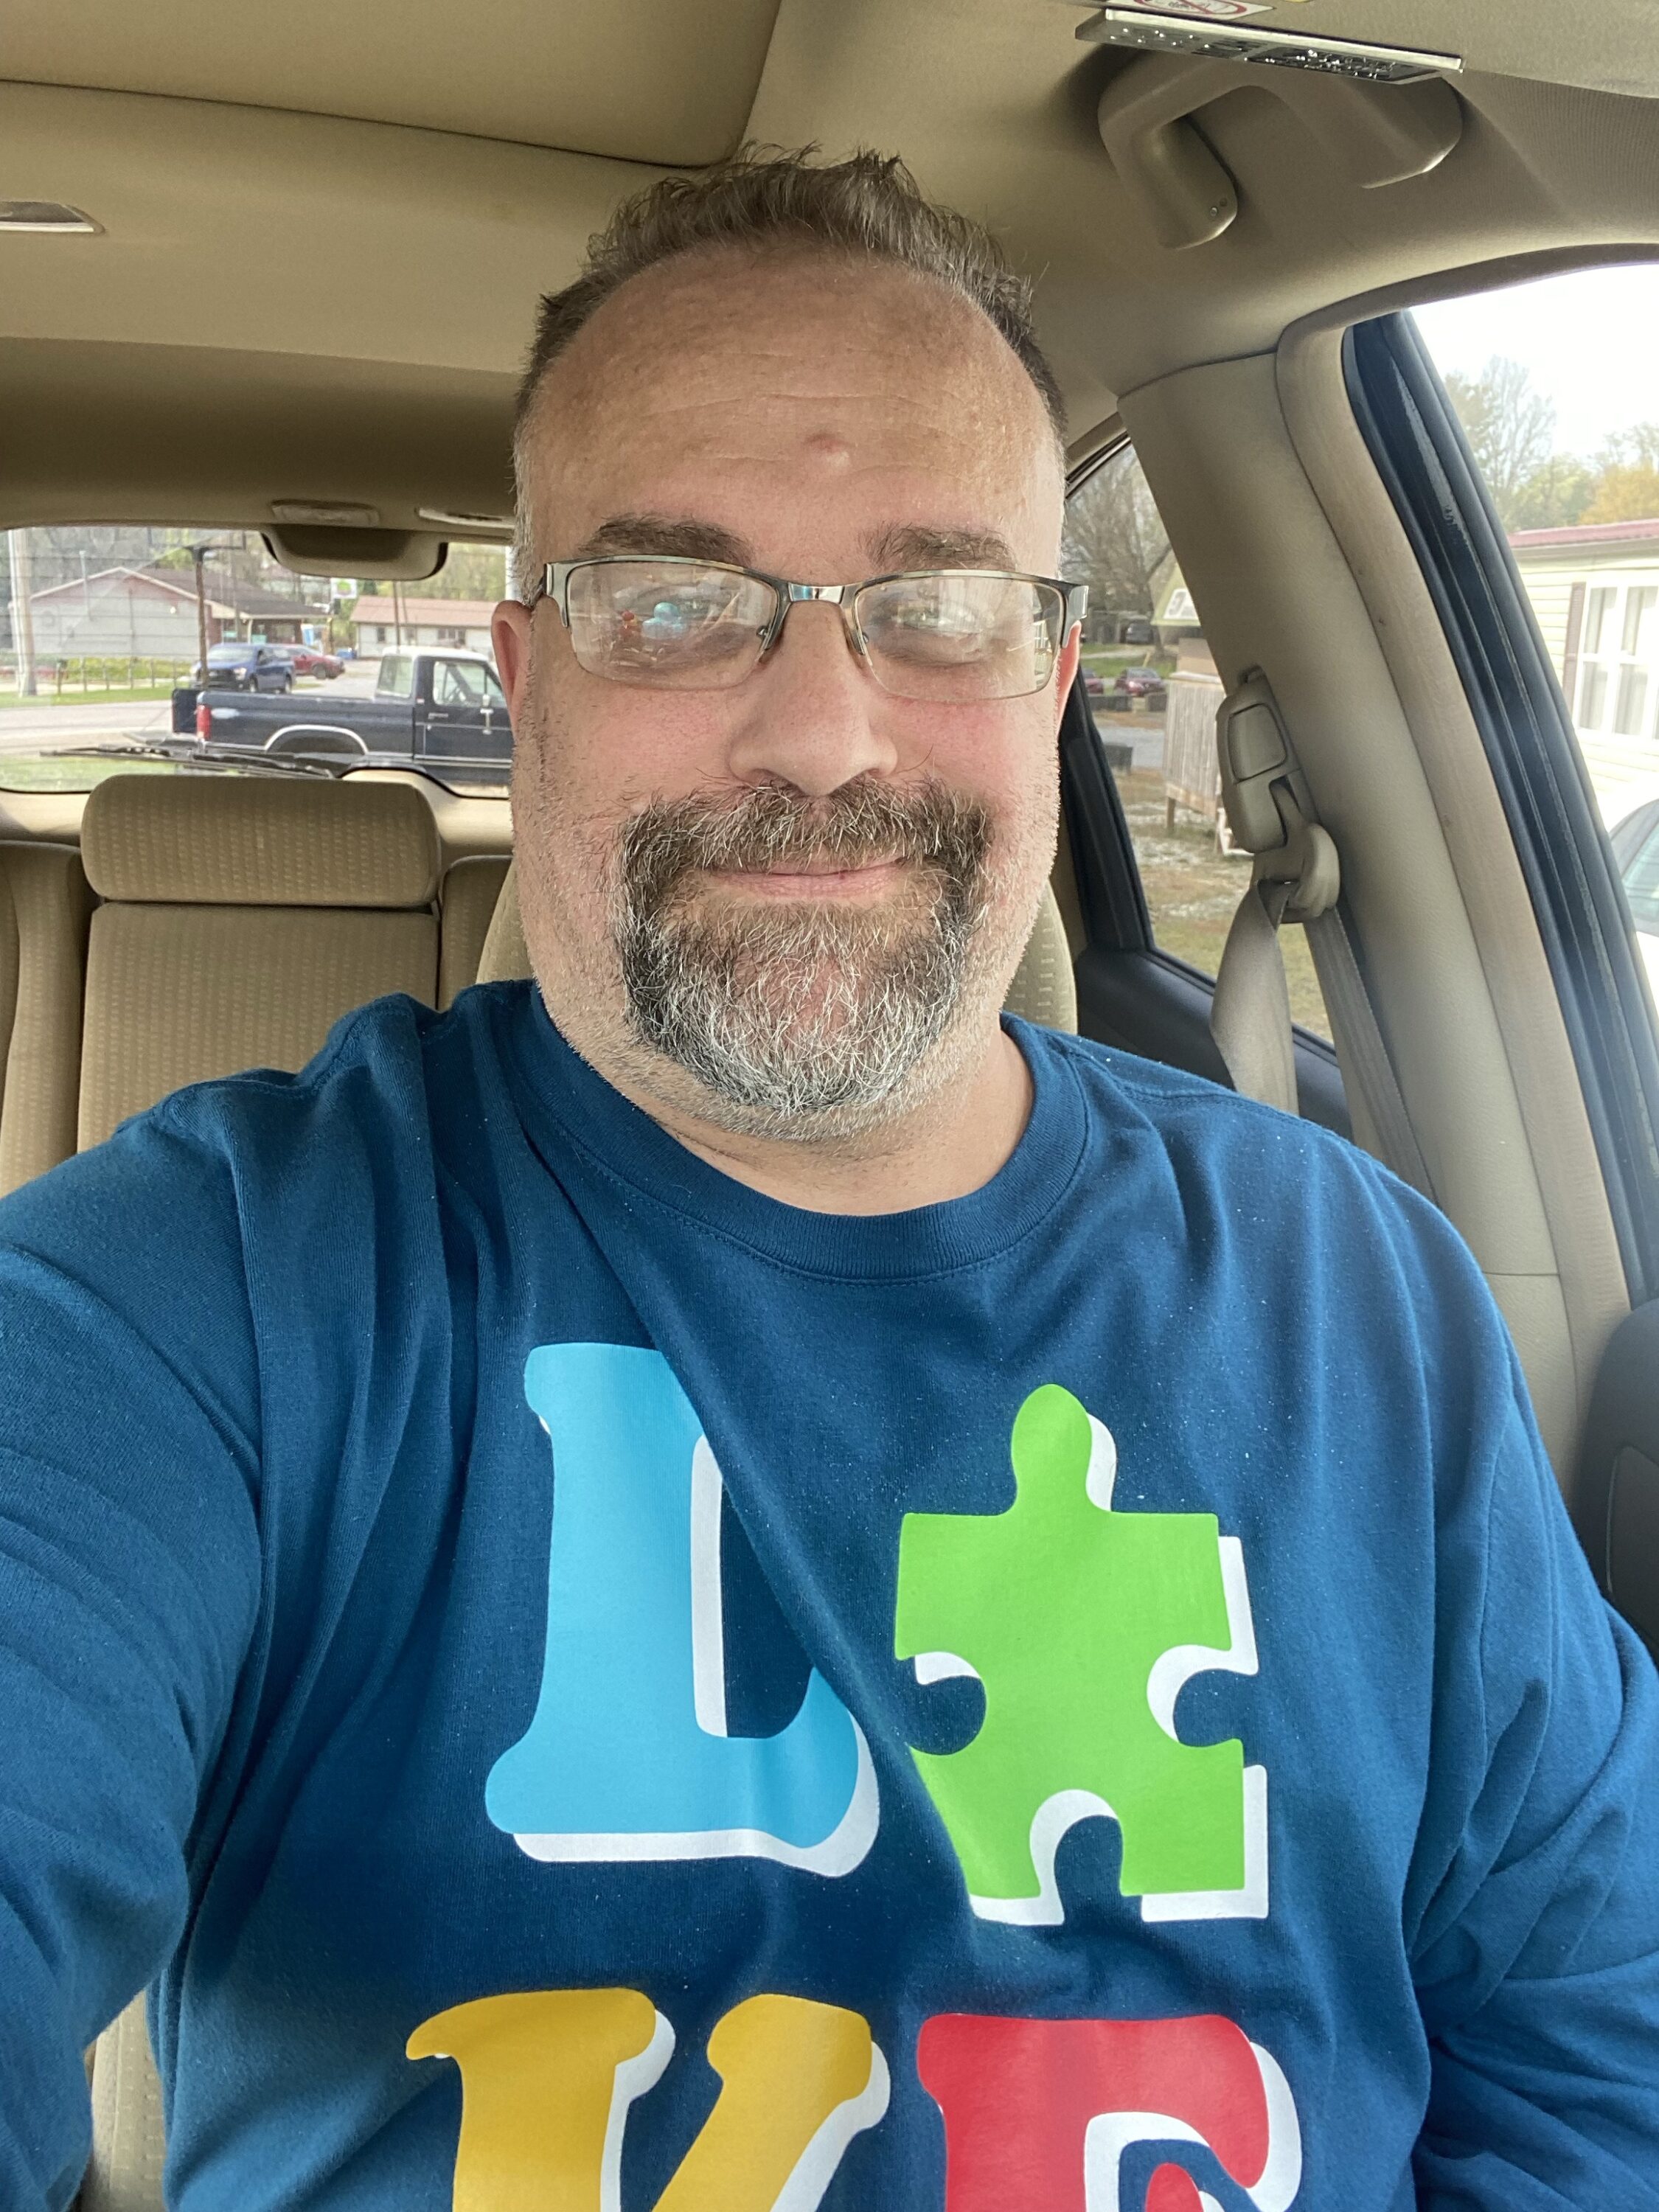 World Autism Awareness Day - This is a day to help raise awareness of autism. They are asking people to wear light blue on April 2 for World Autism Awareness Day. So Light It Up Blue! #LightItUpBlue #LIUB #AutismAwareness #Autism